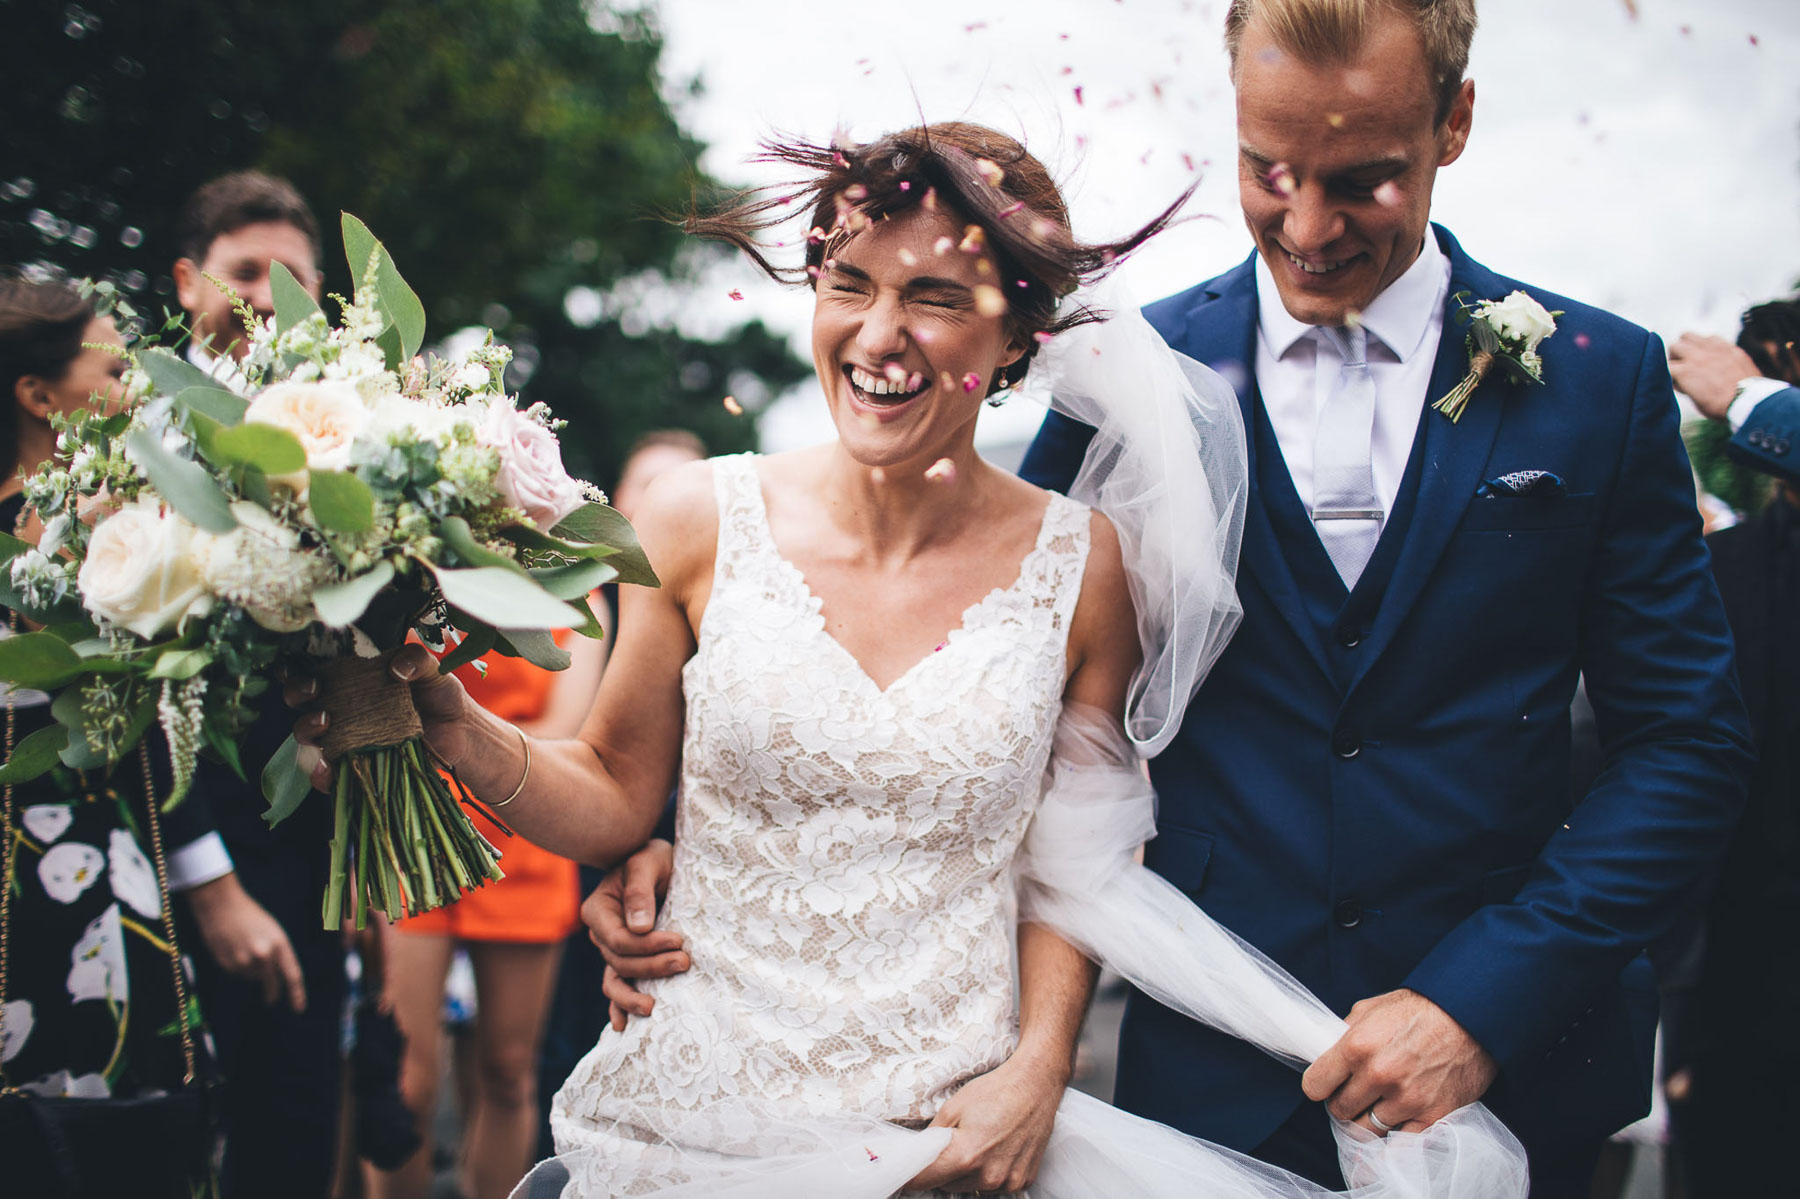 confetti moment that was very windy, the brides hair is lifted up and her eyes are tightly closed as she laughs